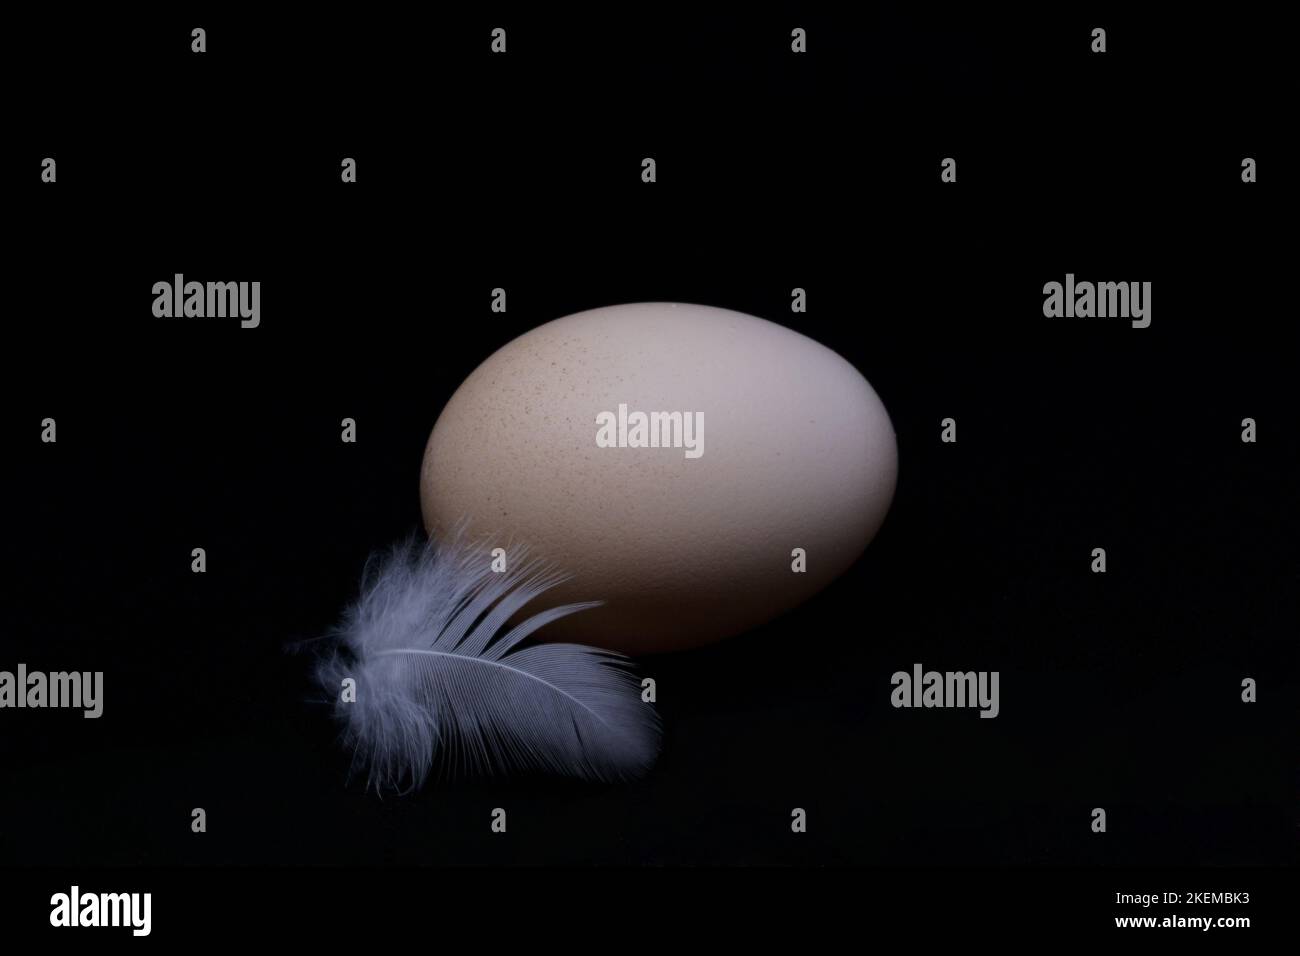 An egg and a fluffy feather isolated on a black background Stock Photo